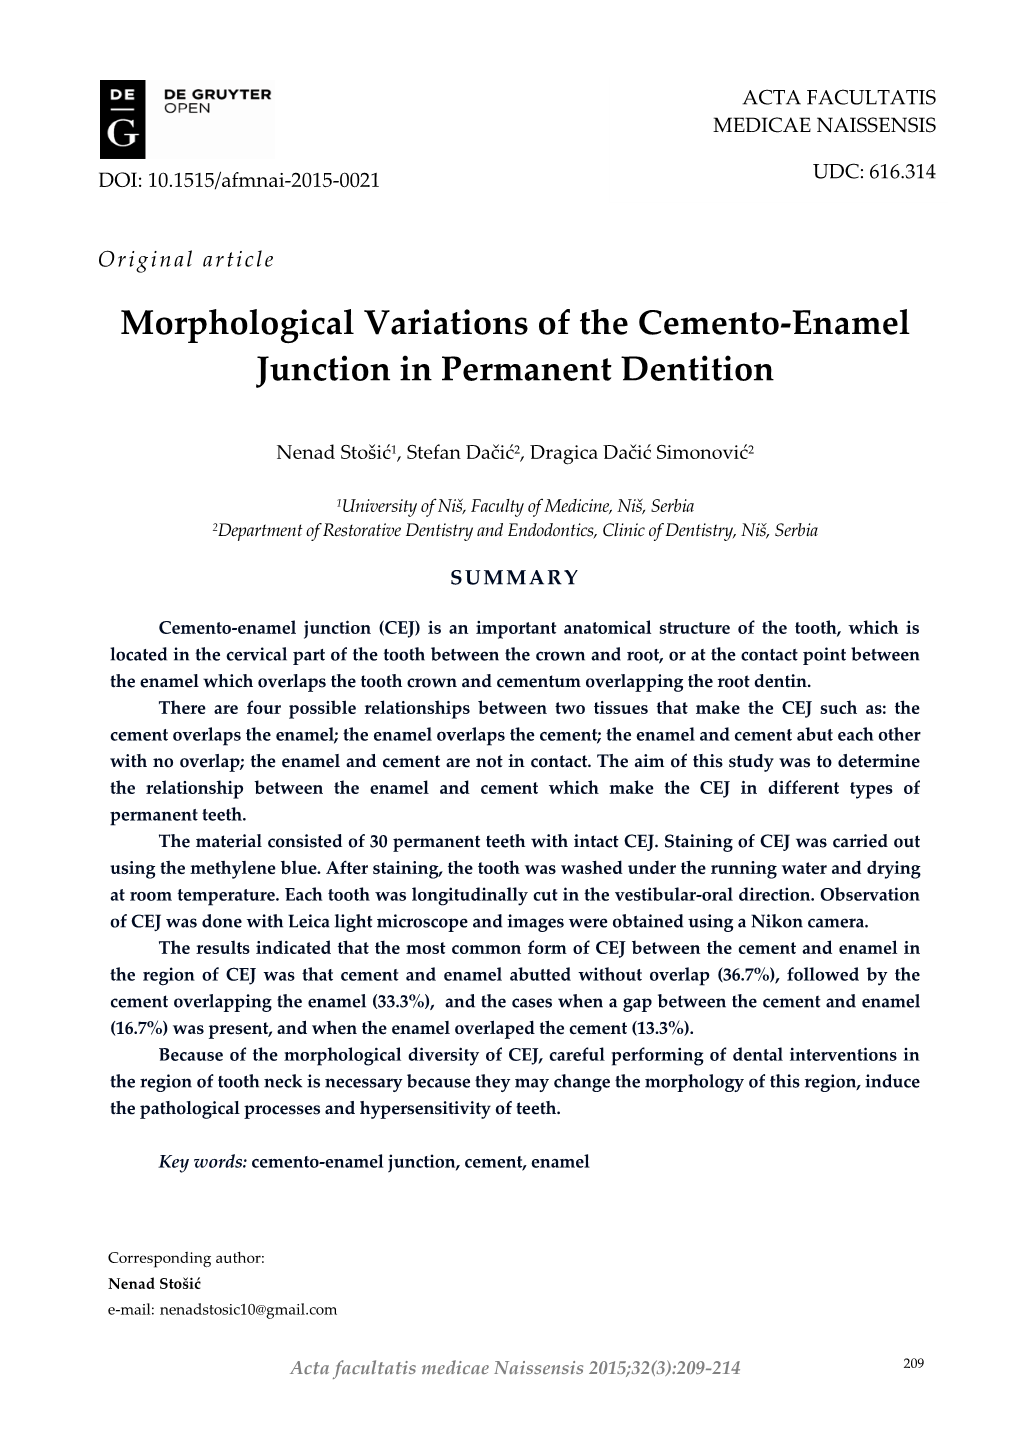 Morphological Variations of the Cemento-Enamel Junction in Permanent Dentition